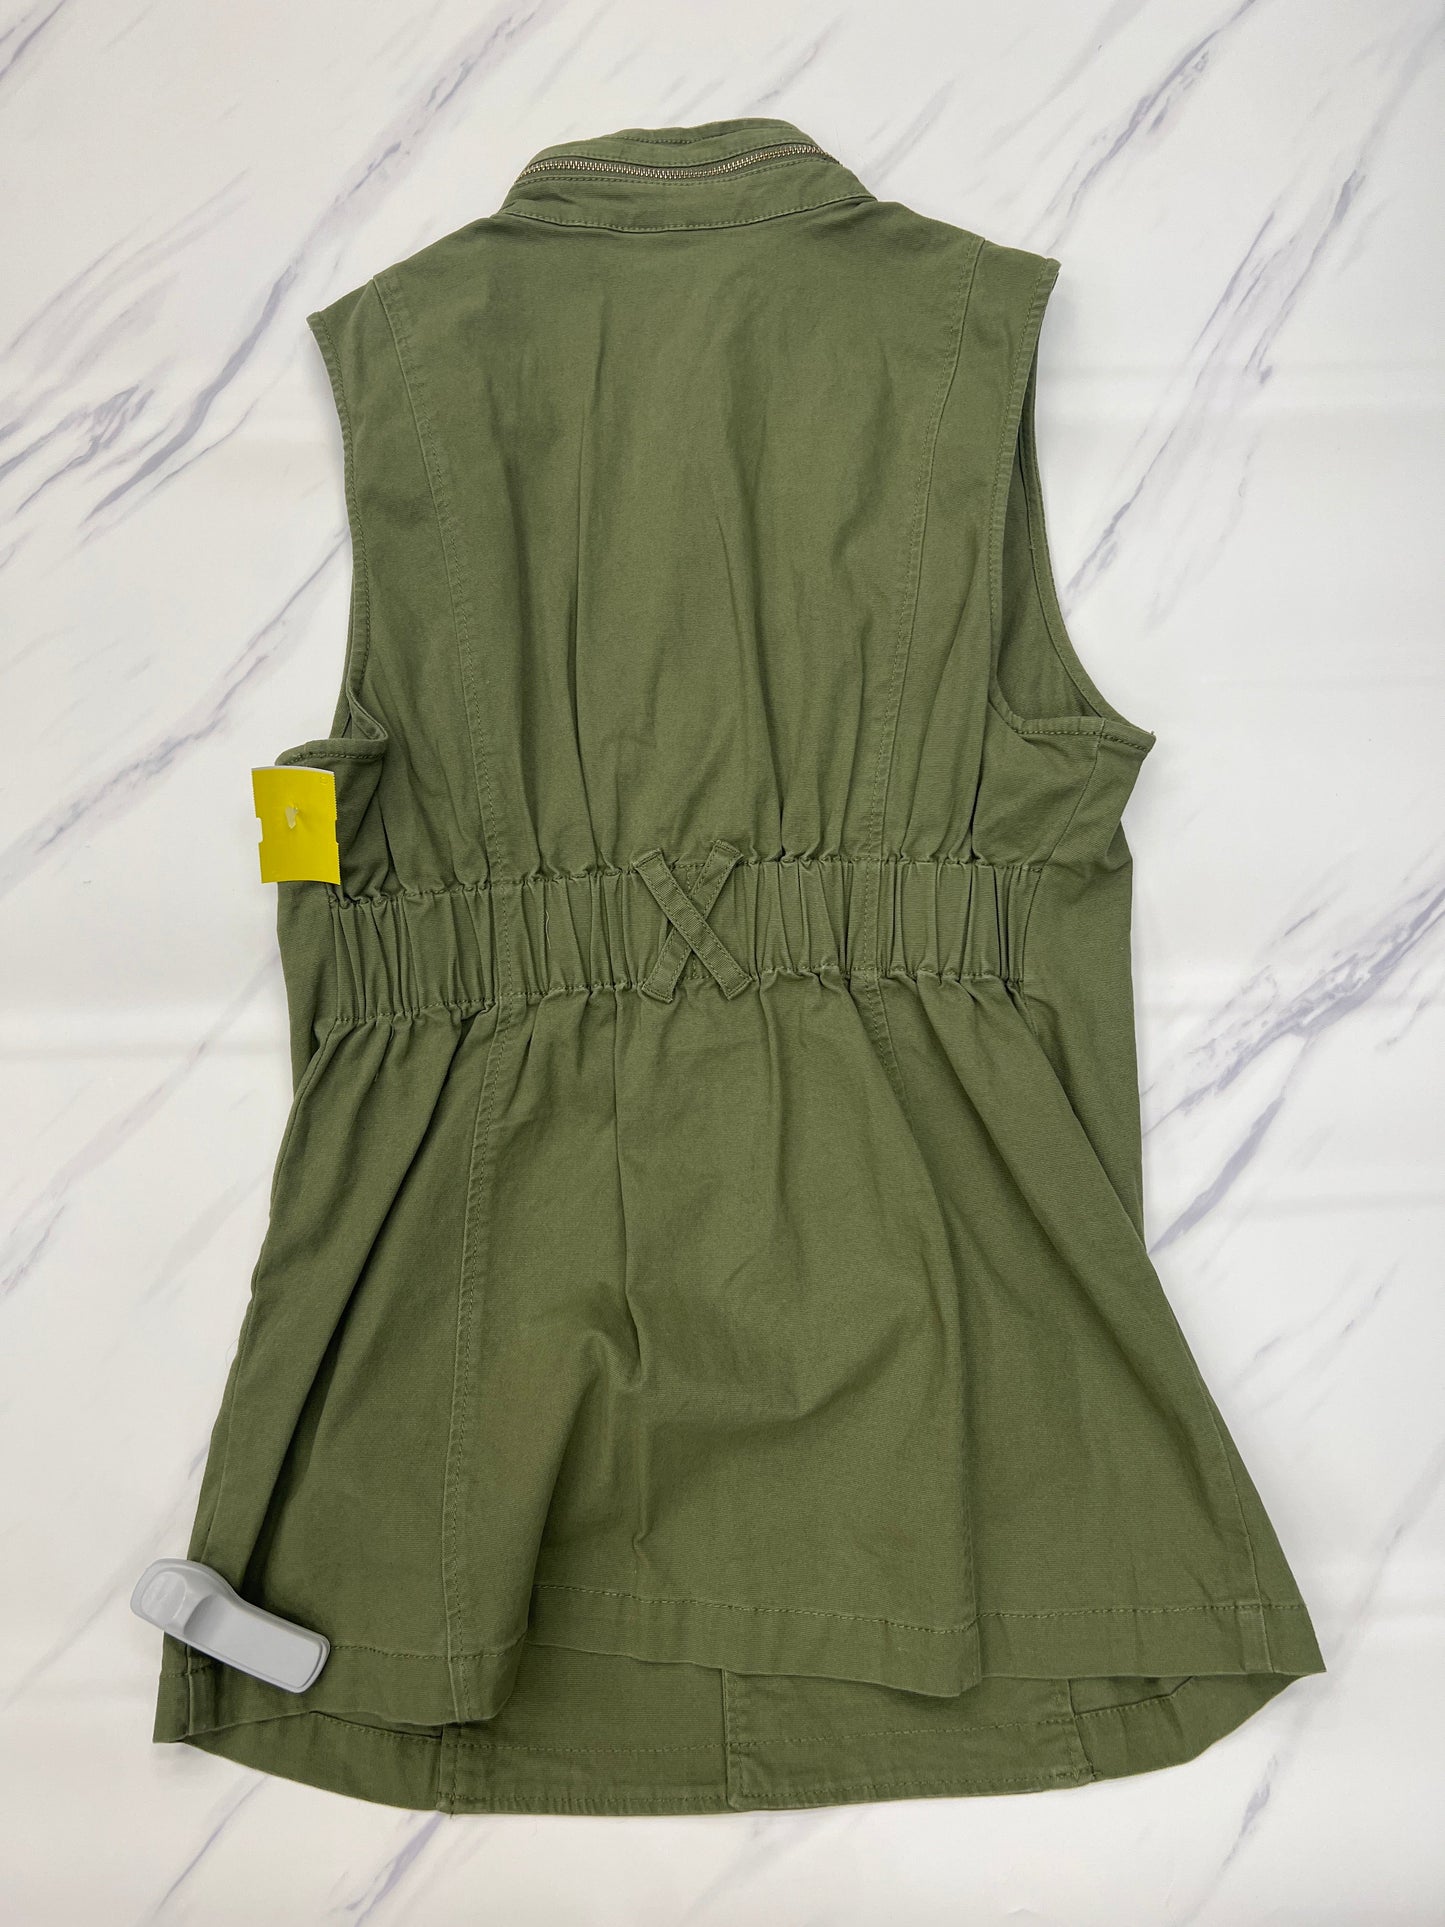 Vest Other By Cabi  Size: S